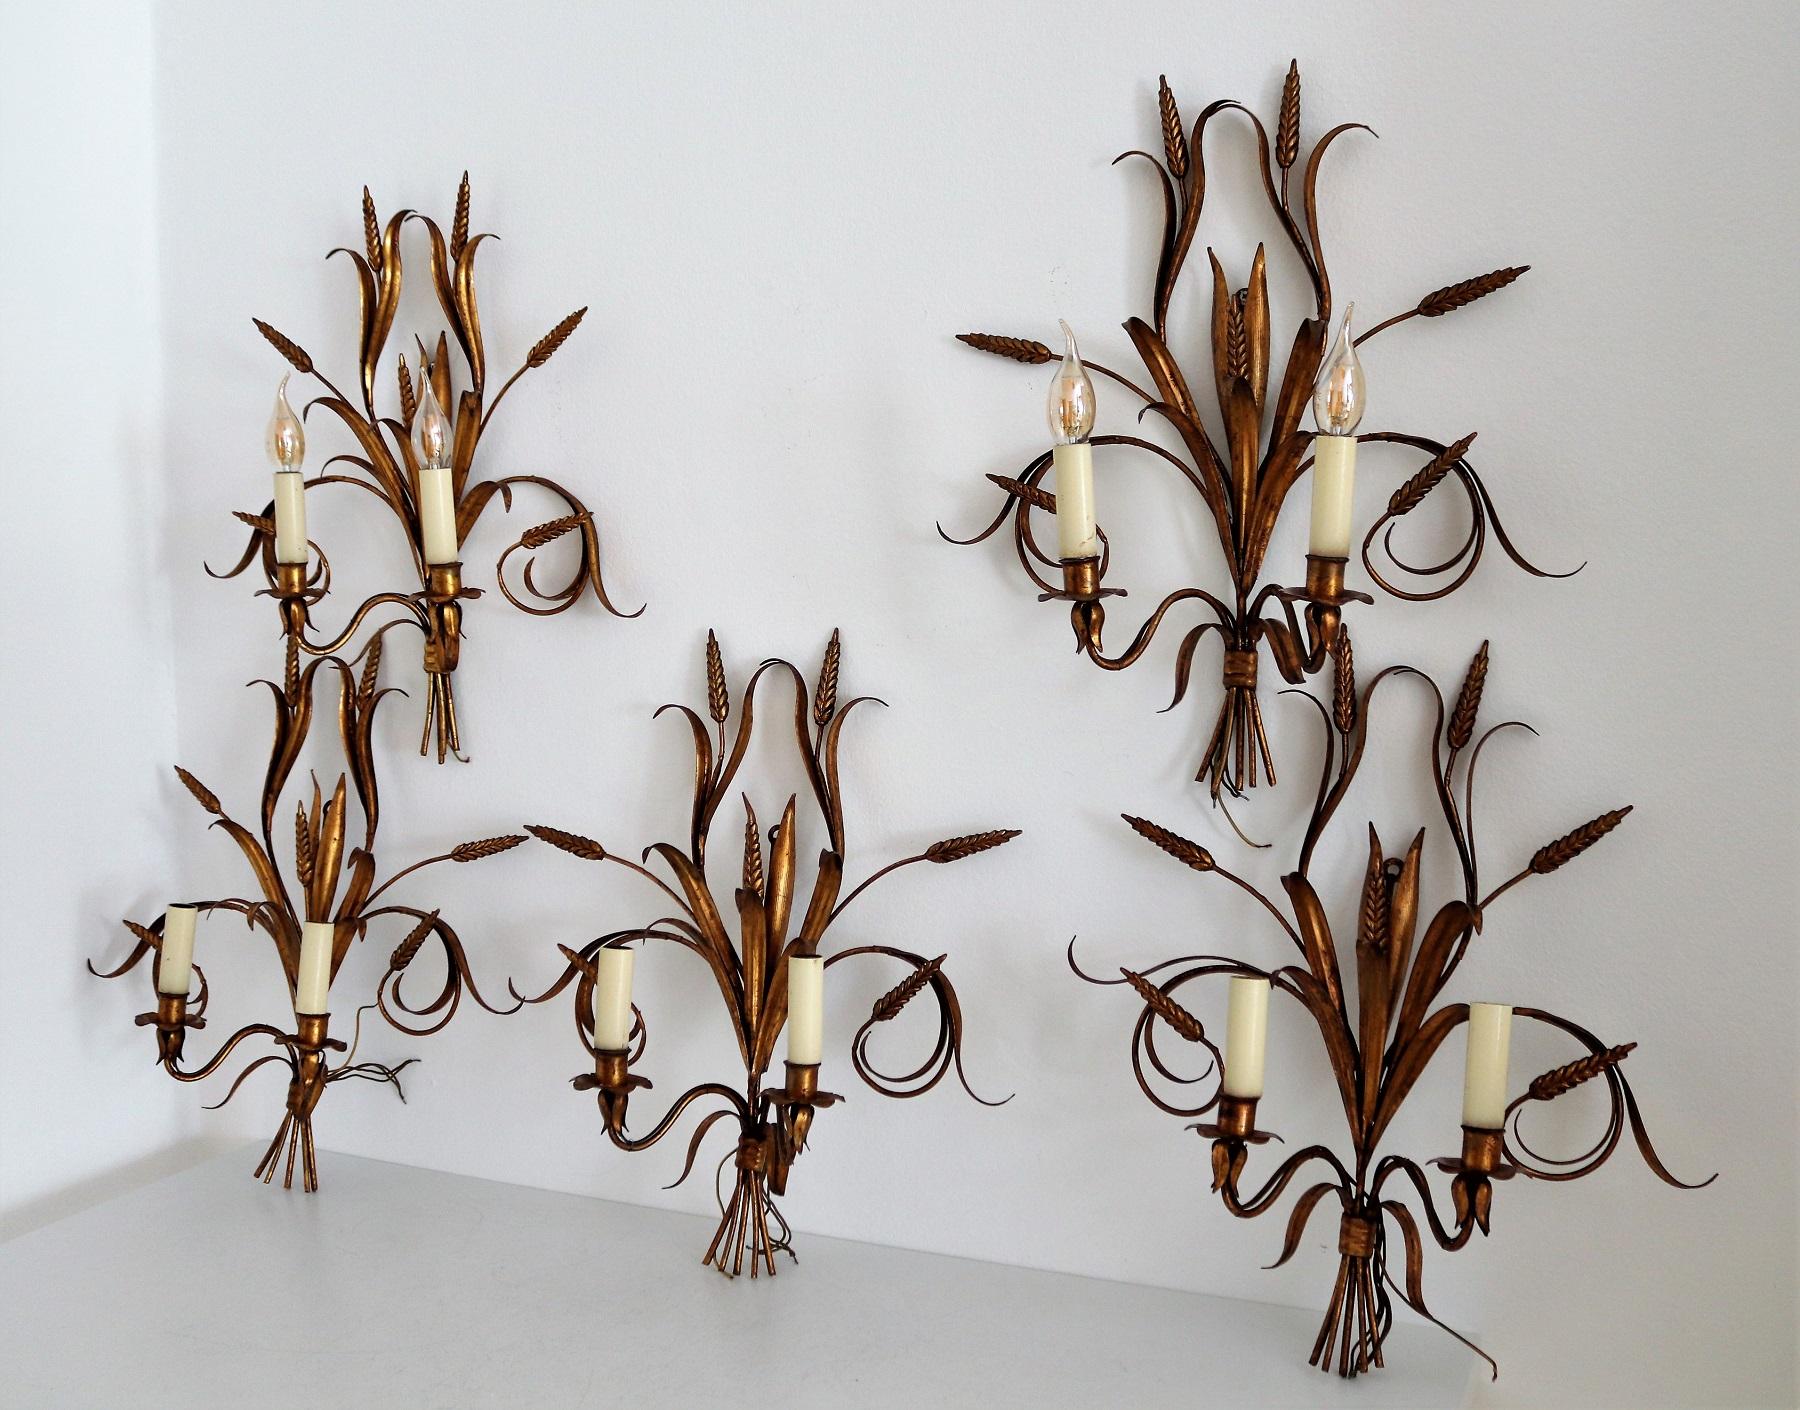 Italian Midcentury Gilt Tole Wall Sconces with Wheat Sheaf, 1950s, Set of Five For Sale 6